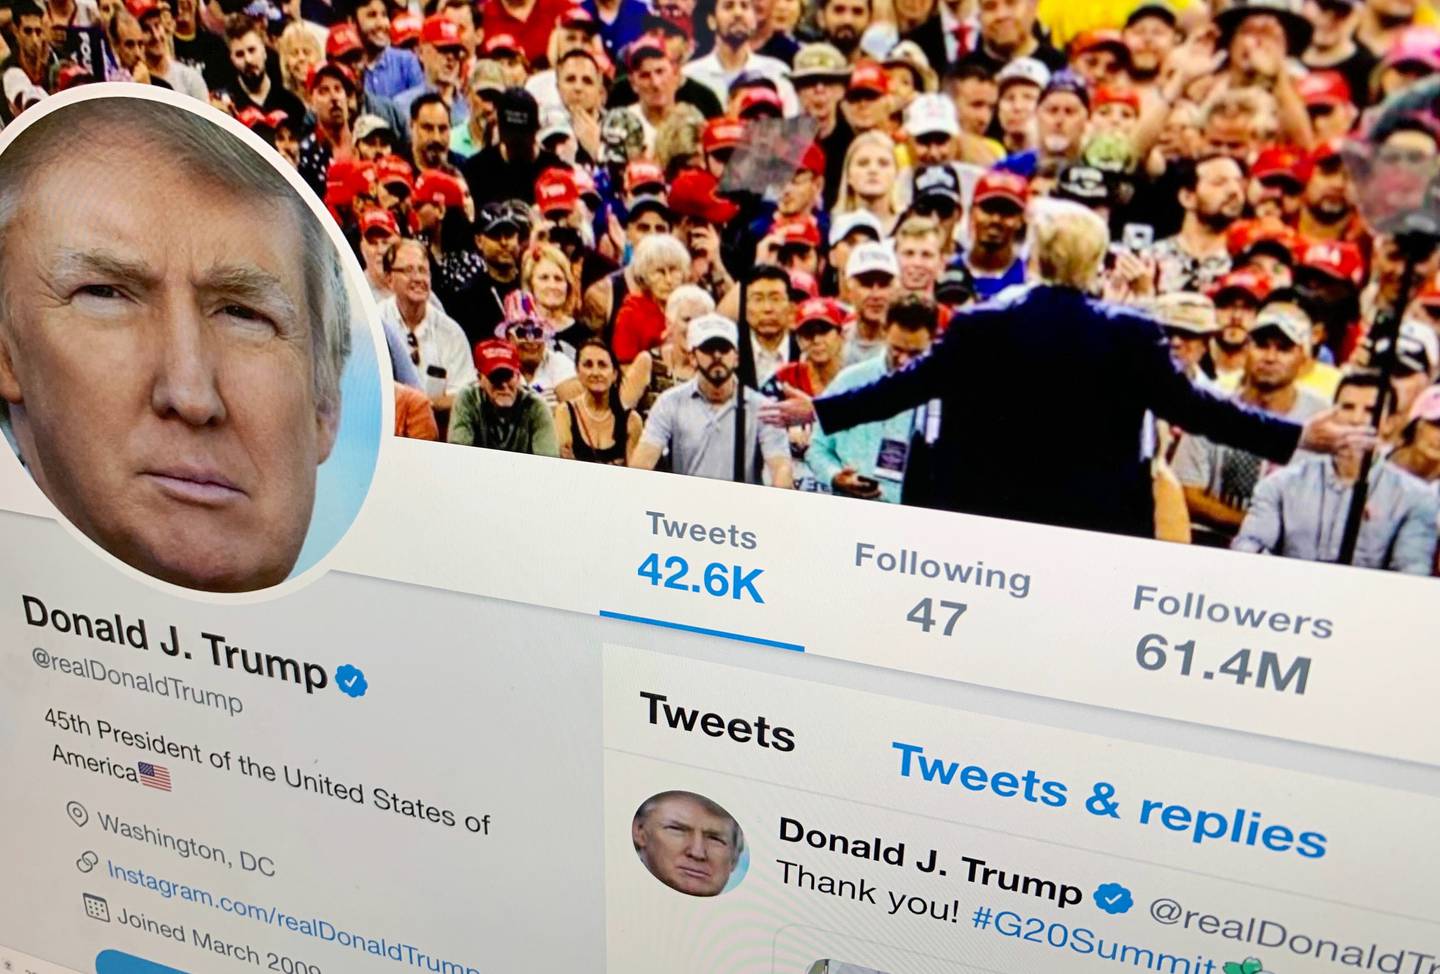 Former US president Donald Trump is hoping his nw social media company will rival other such as Twitter, which banned him after the January 6 insurrection at the Capitol building. AP